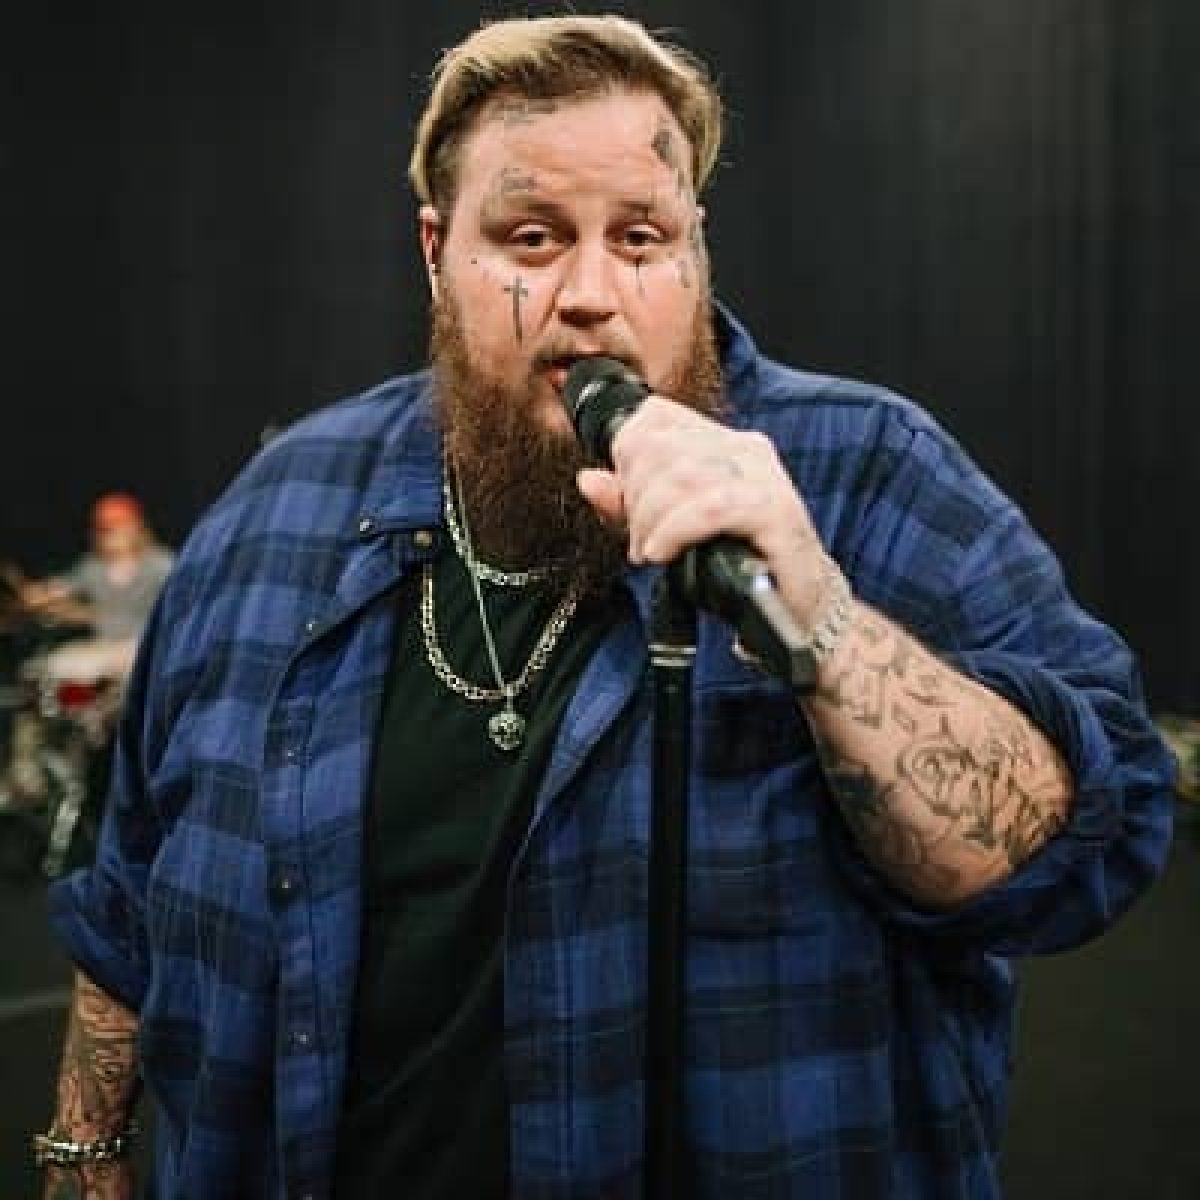 Jelly Roll - Bio, Age, Net Worth, Height, Married, Nationality, Body Measurement, Career